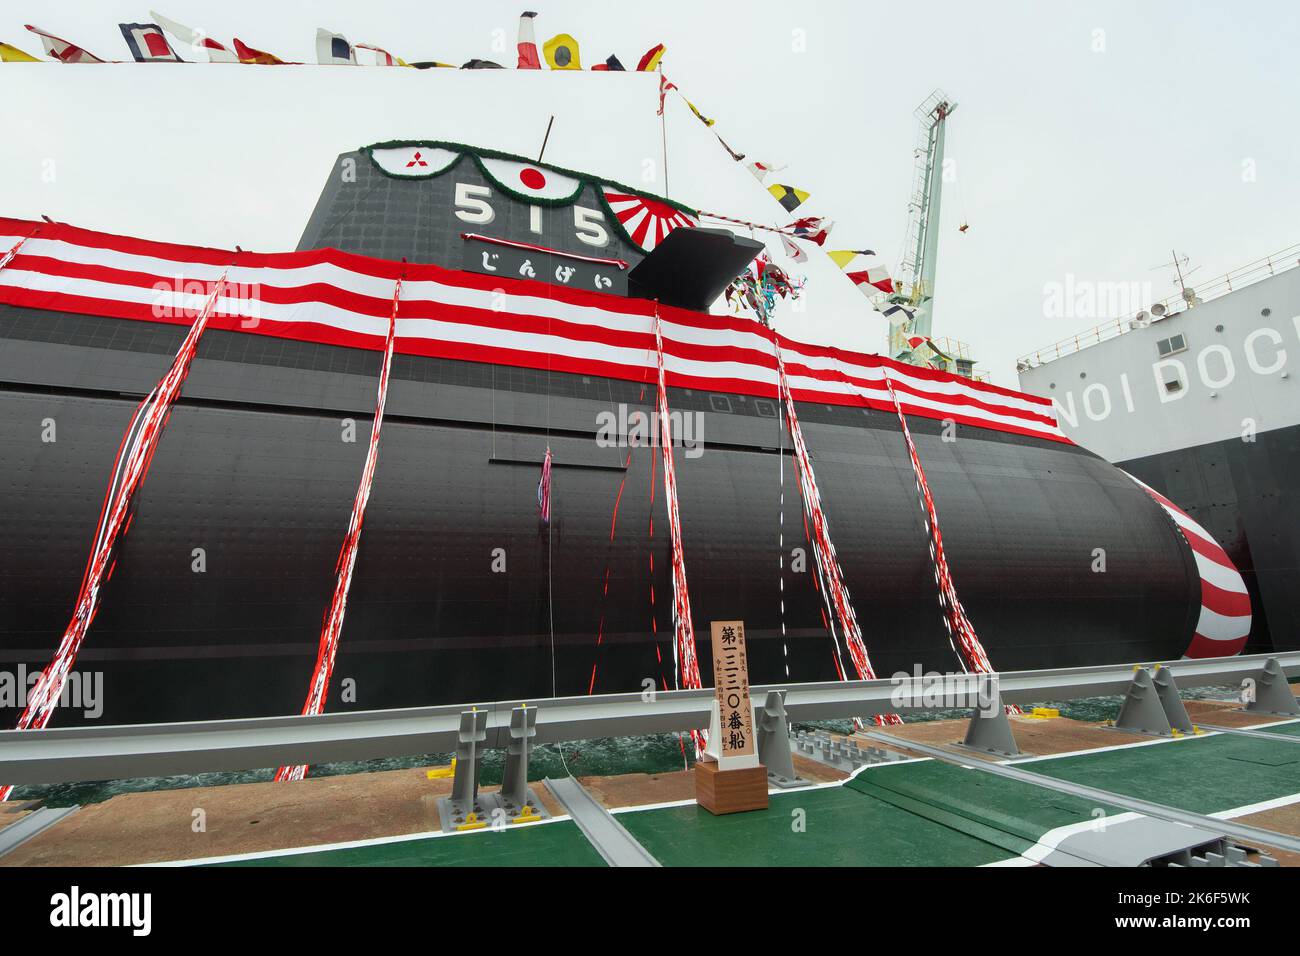 Hyogo-Prefecture, Japan on October 12, 2022. Japan's new submarine 'Jingei' is seen during the launching ceremony at Kobe Shipyard & Machinery Works of MHI in Kobe, Hyogo-Prefecture, Japan on October 12, 2022. Stock Photo